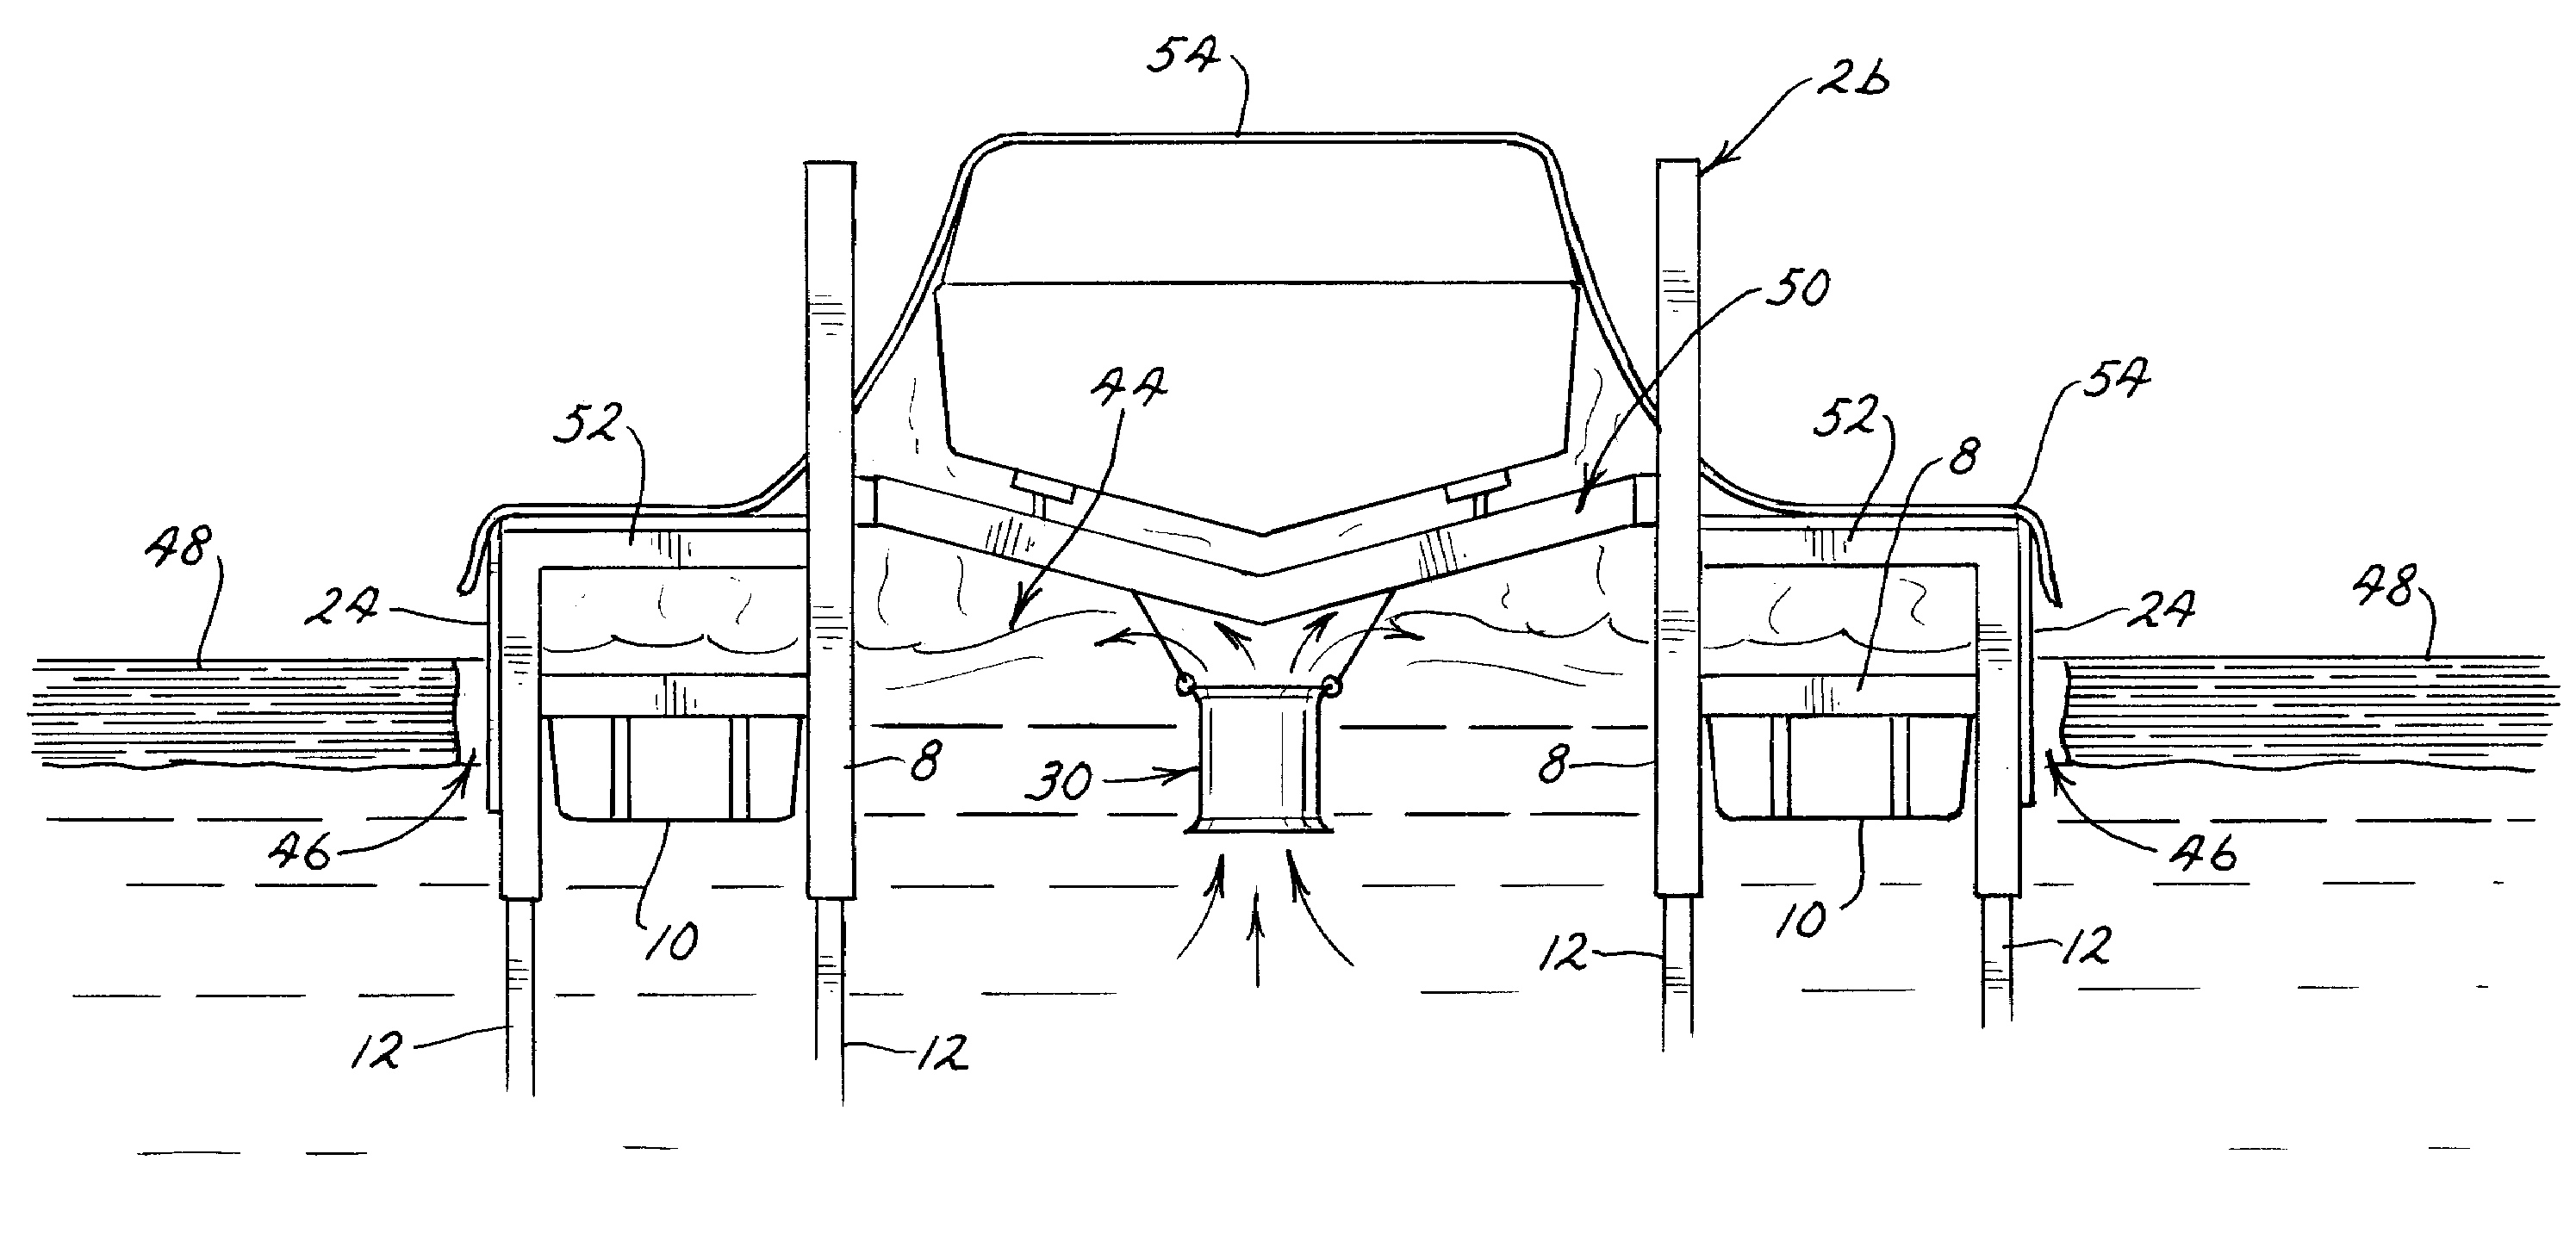 Structure forming a breakwater and capable of ice free, year round operation